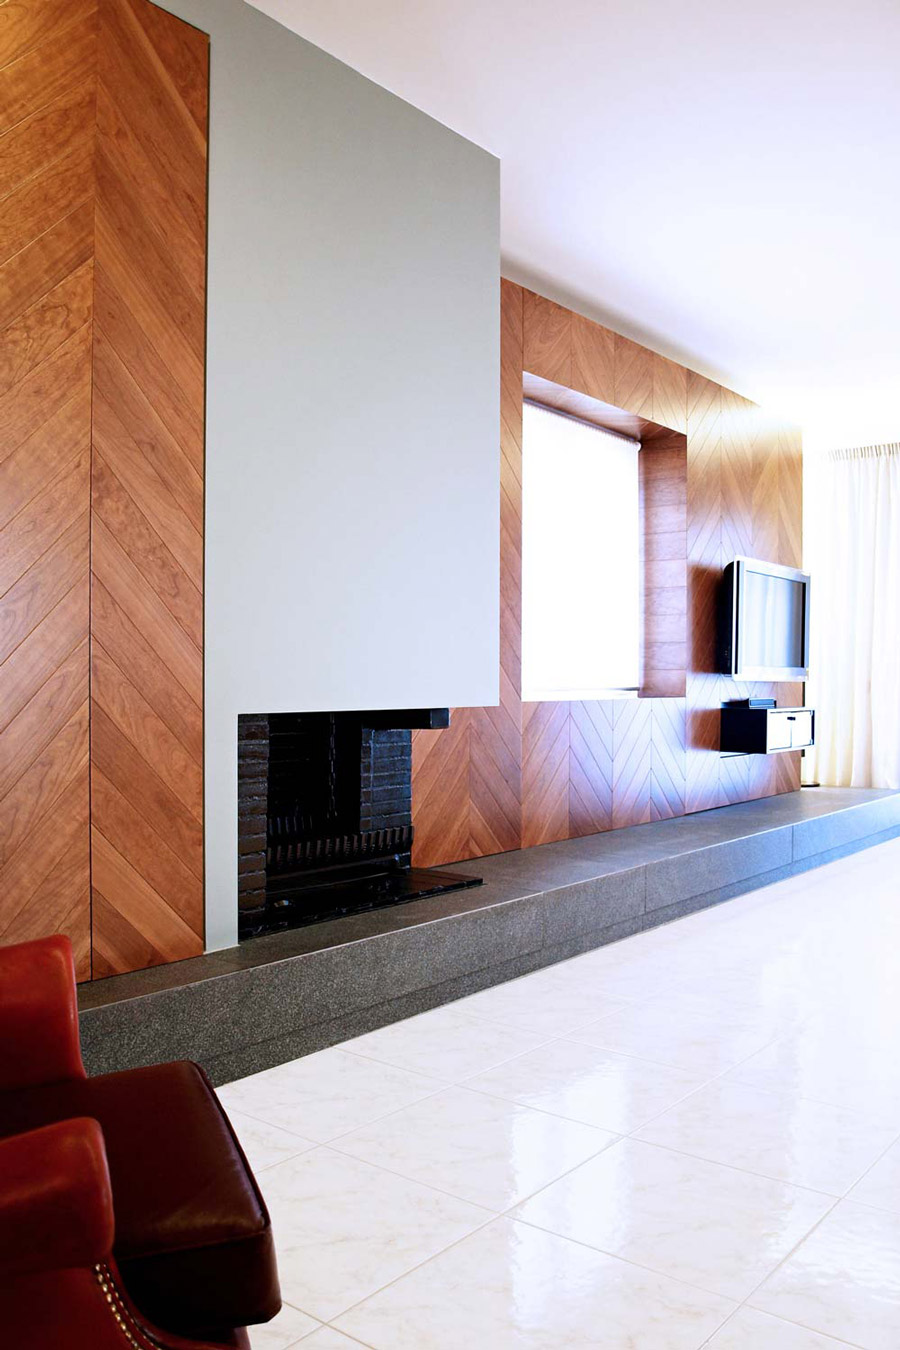 The shell of the existing fireplace was constructed and transformed.